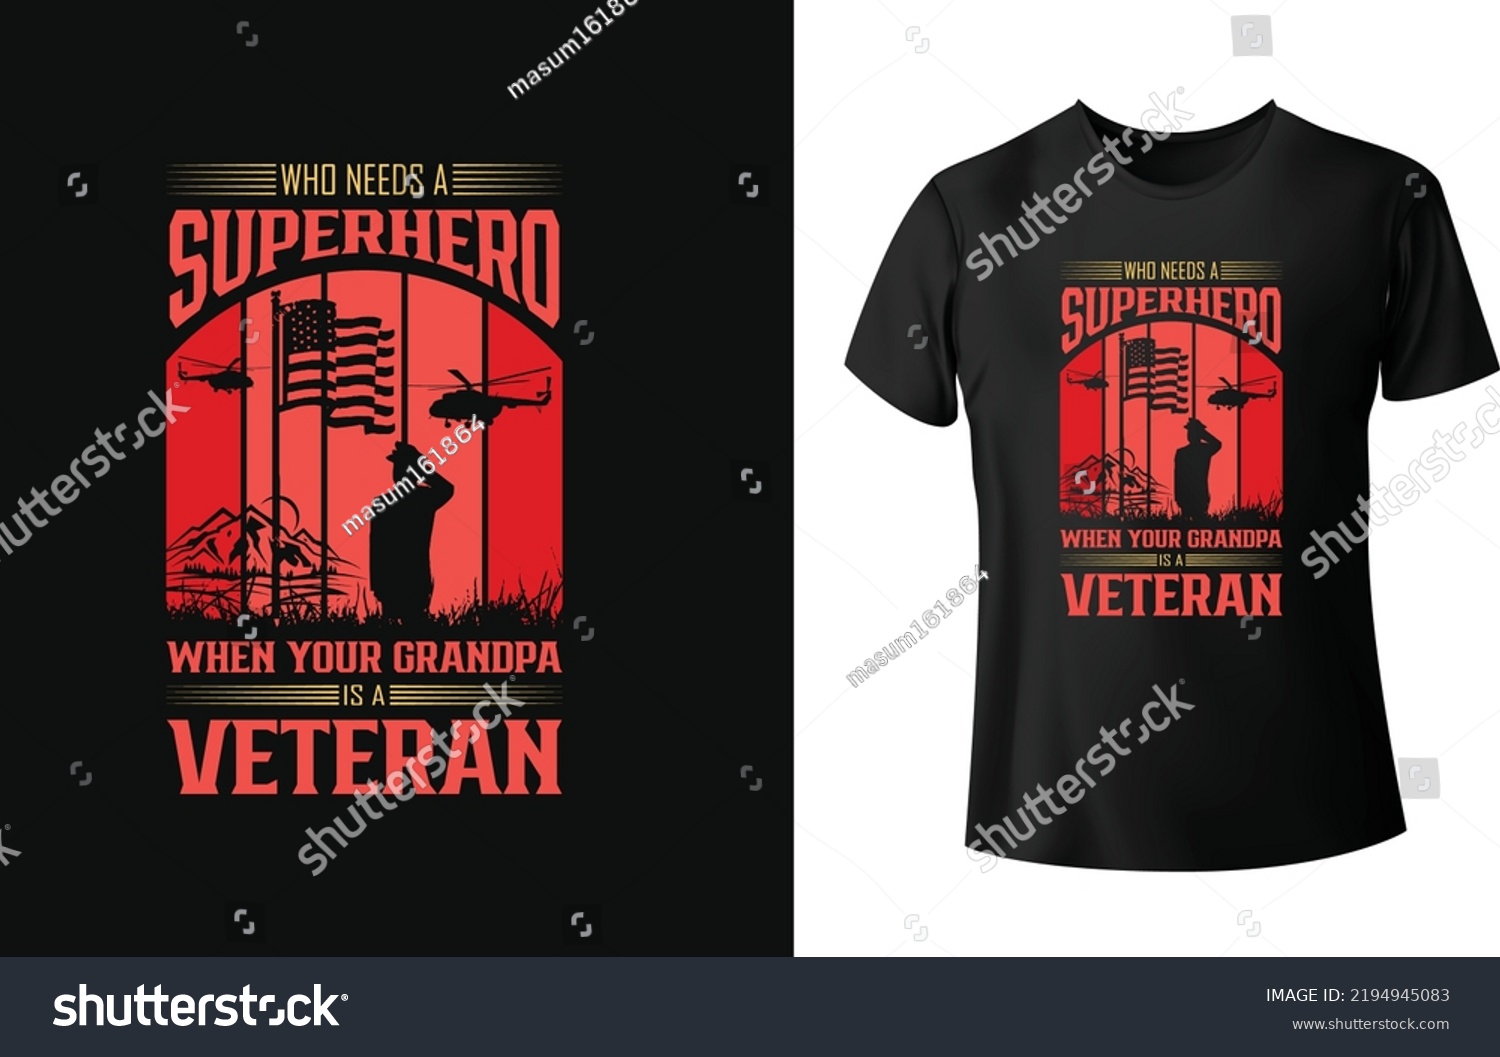 SVG of This is a veteran t-shirt design.
You can print them on t-shirts, mugs, pillows, hoodies, wall posters, decals, or any merchandise or anywhere,
You will receive an eps file, Thank you. svg